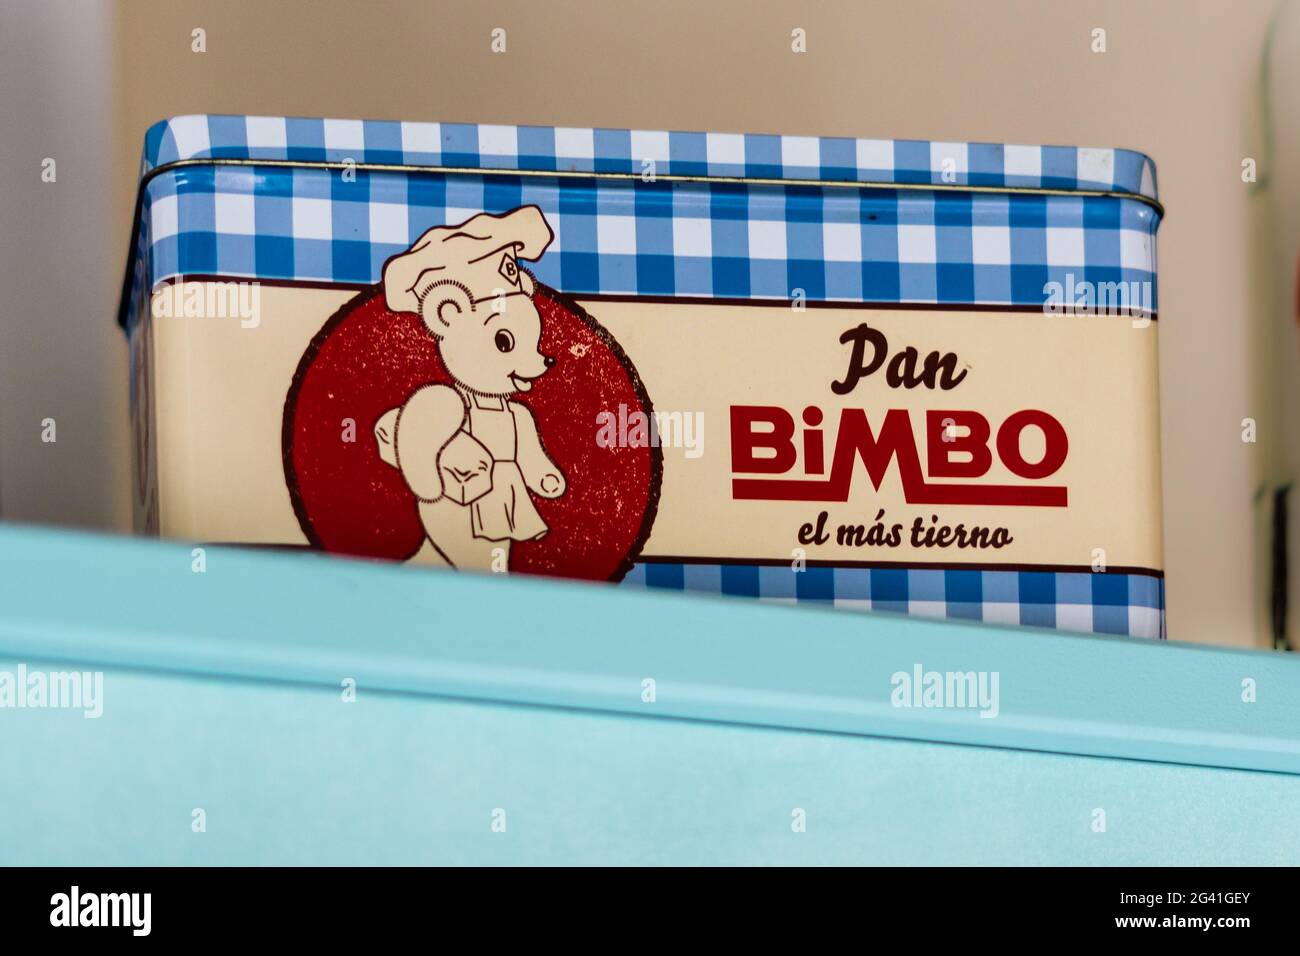 Barcelona, Spain - June 4, 2021. Old box of Bimbo products and bread Stock Photo